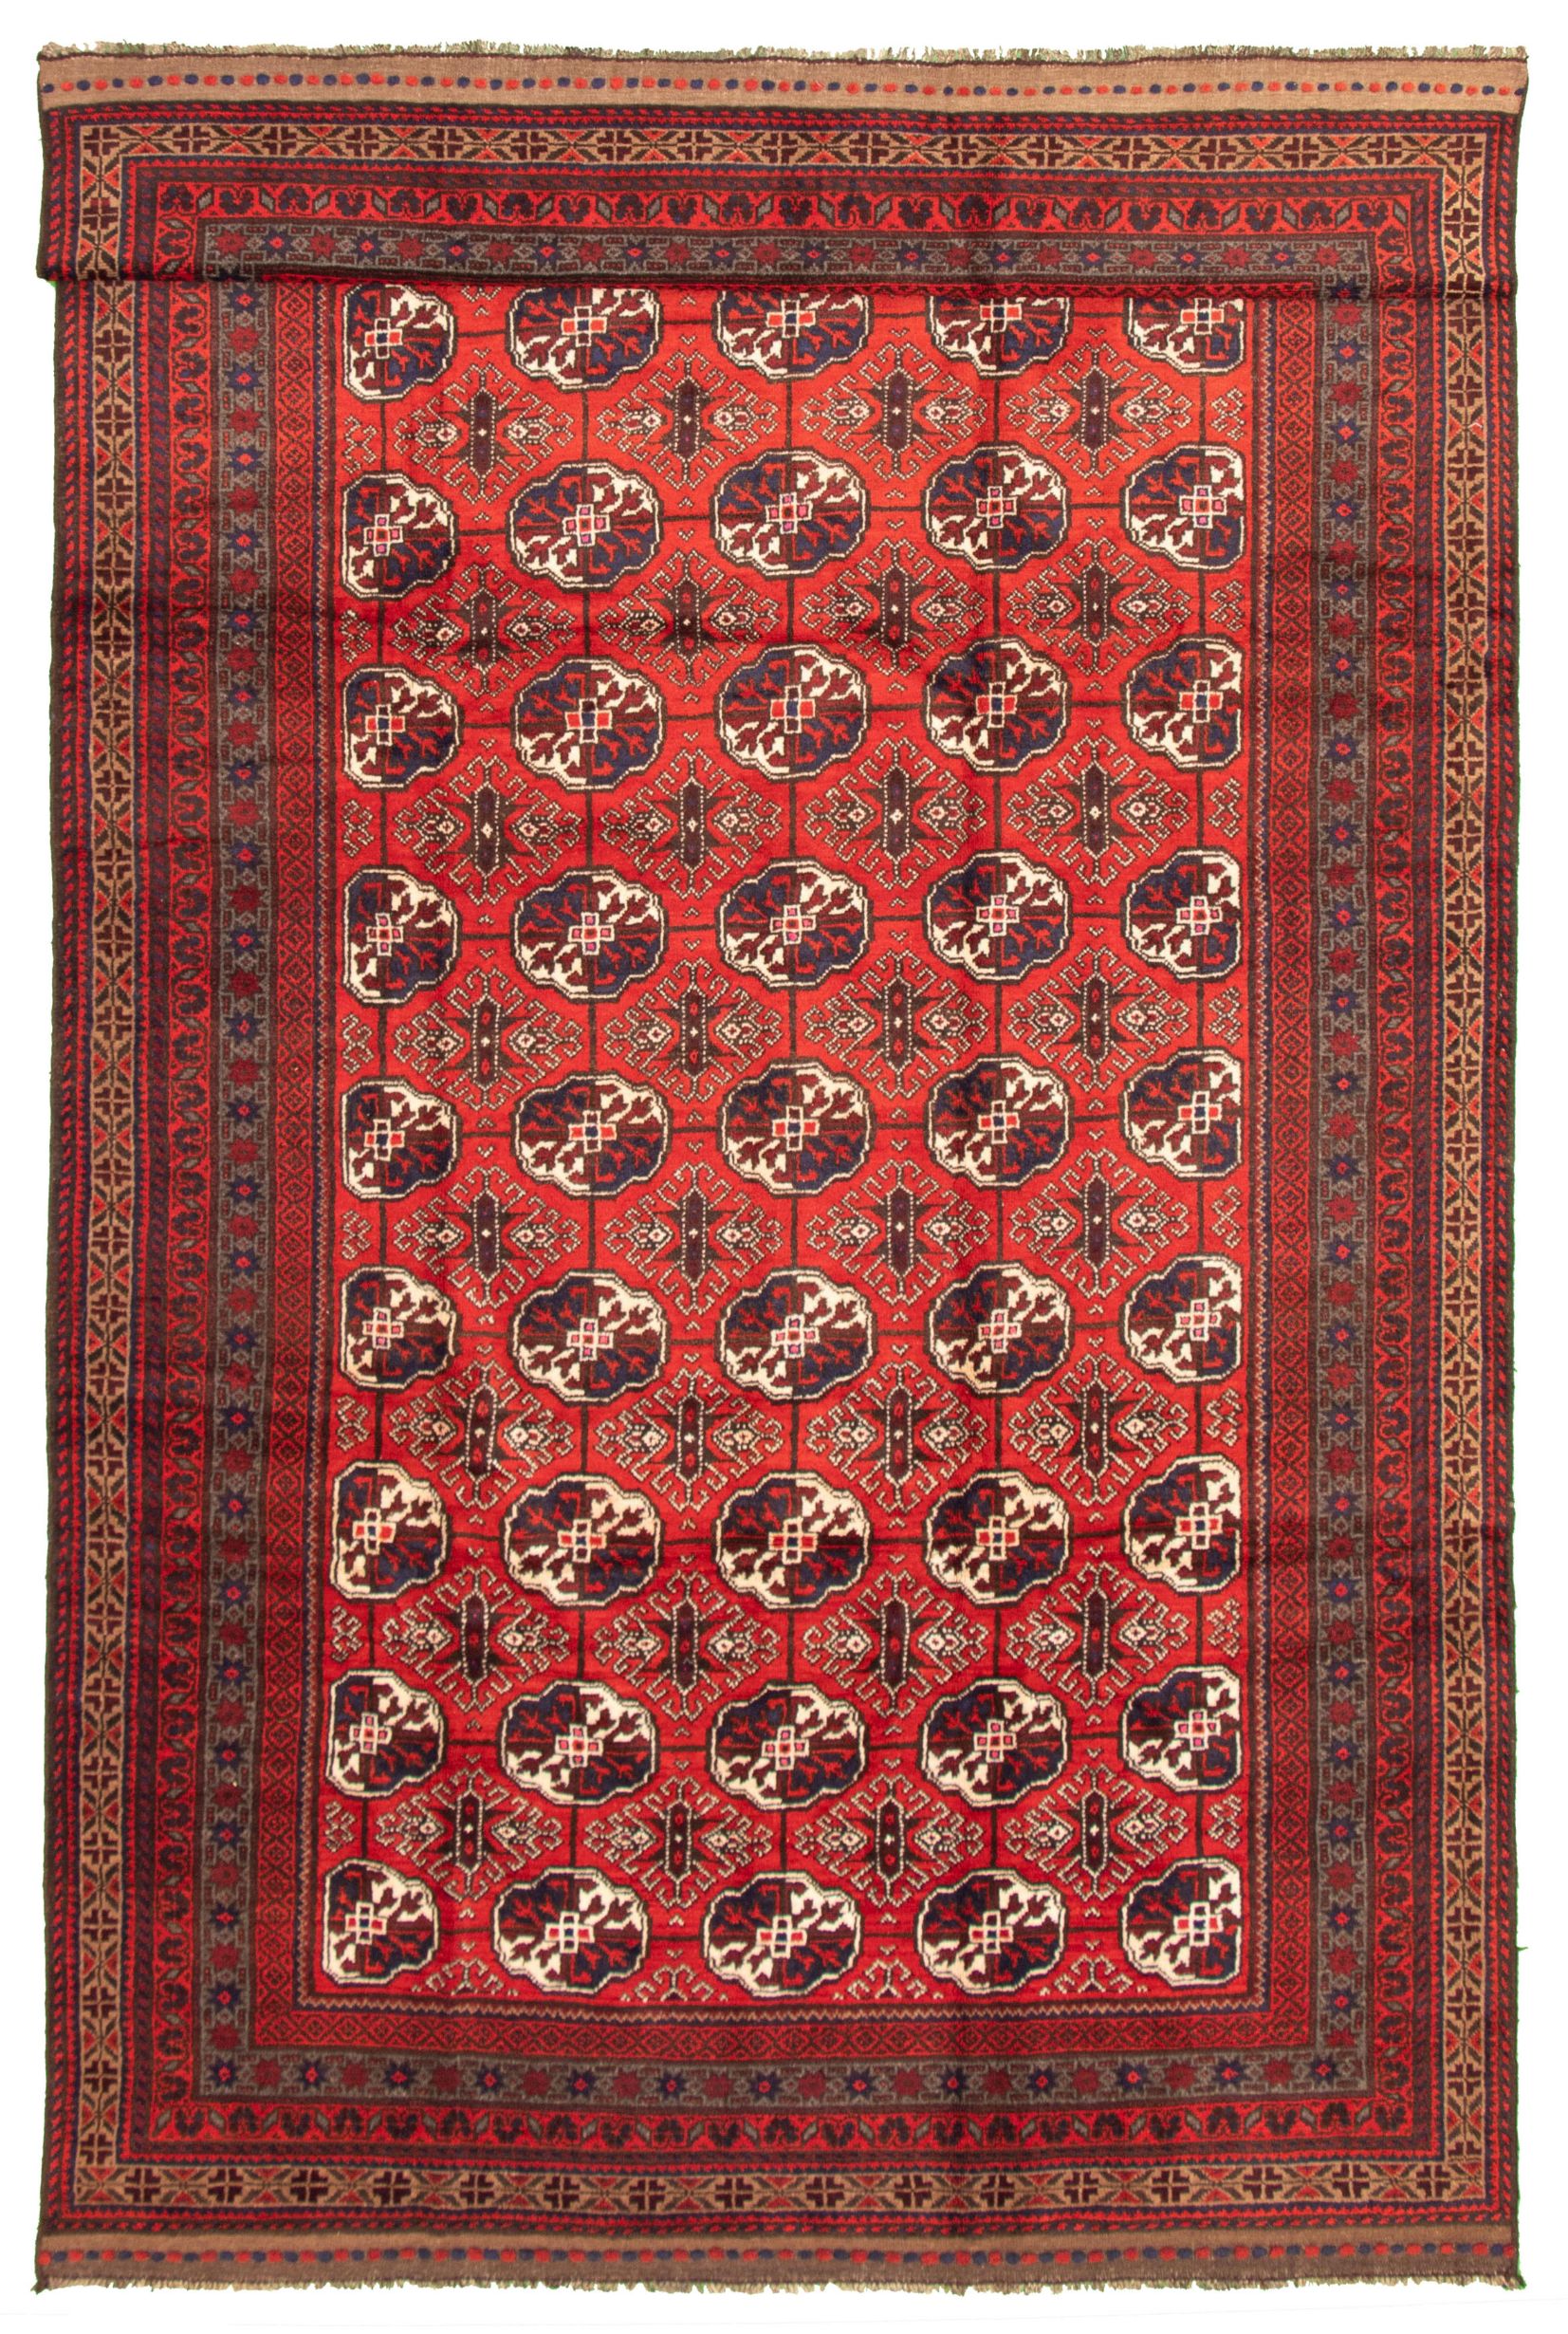 Hand-knotted Teimani Red Wool Rug 7'10" x 13'7" Size: 7'10" x 13'7"  